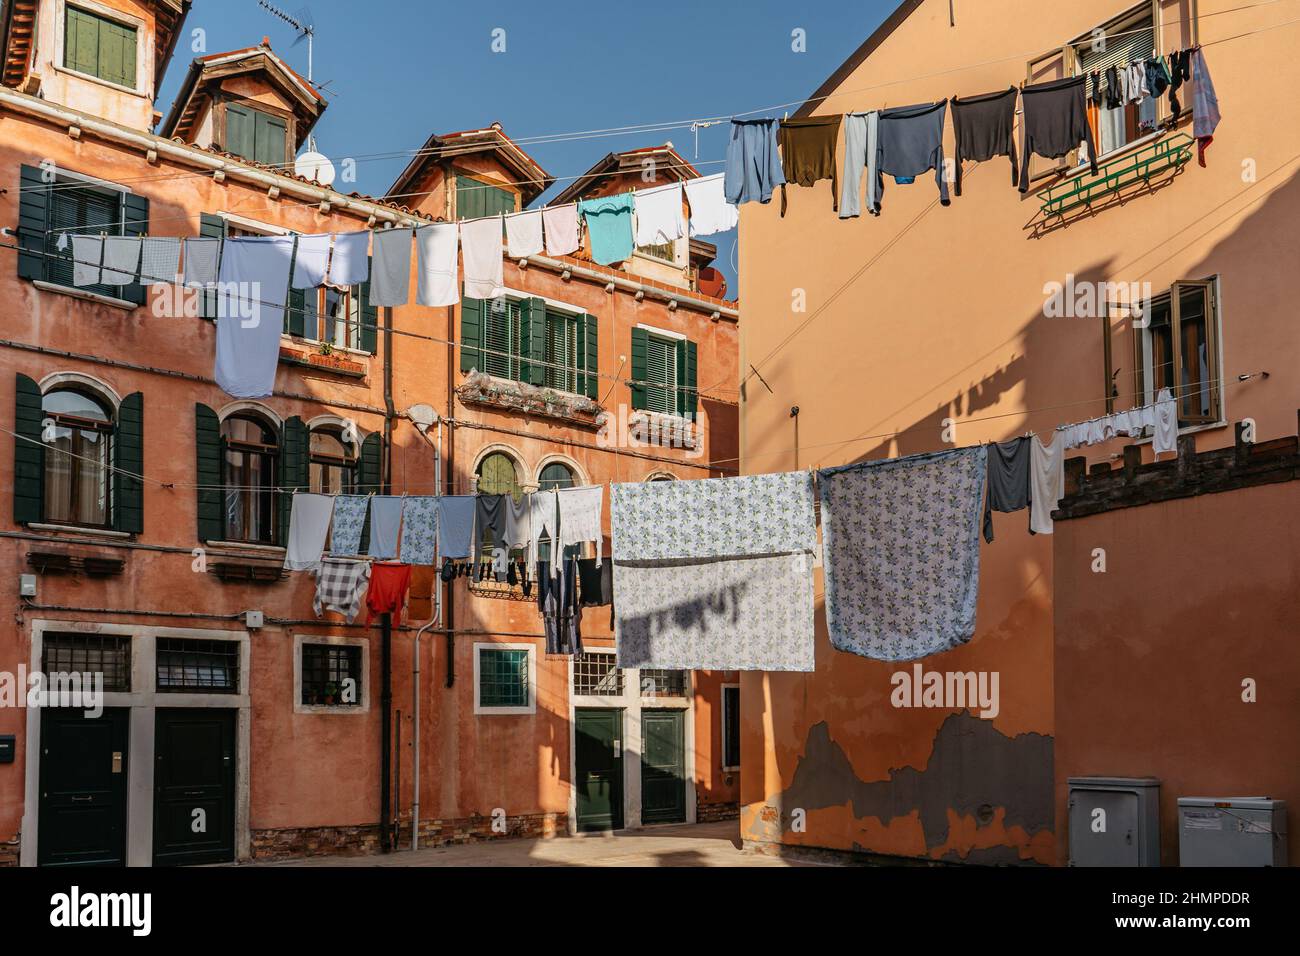 Laundry hanging out of typical Venetian facade,Italy.Narrow street with colorful buildings and clothes dry on rope,Venice.Clean clothes drying outdoor Stock Photo